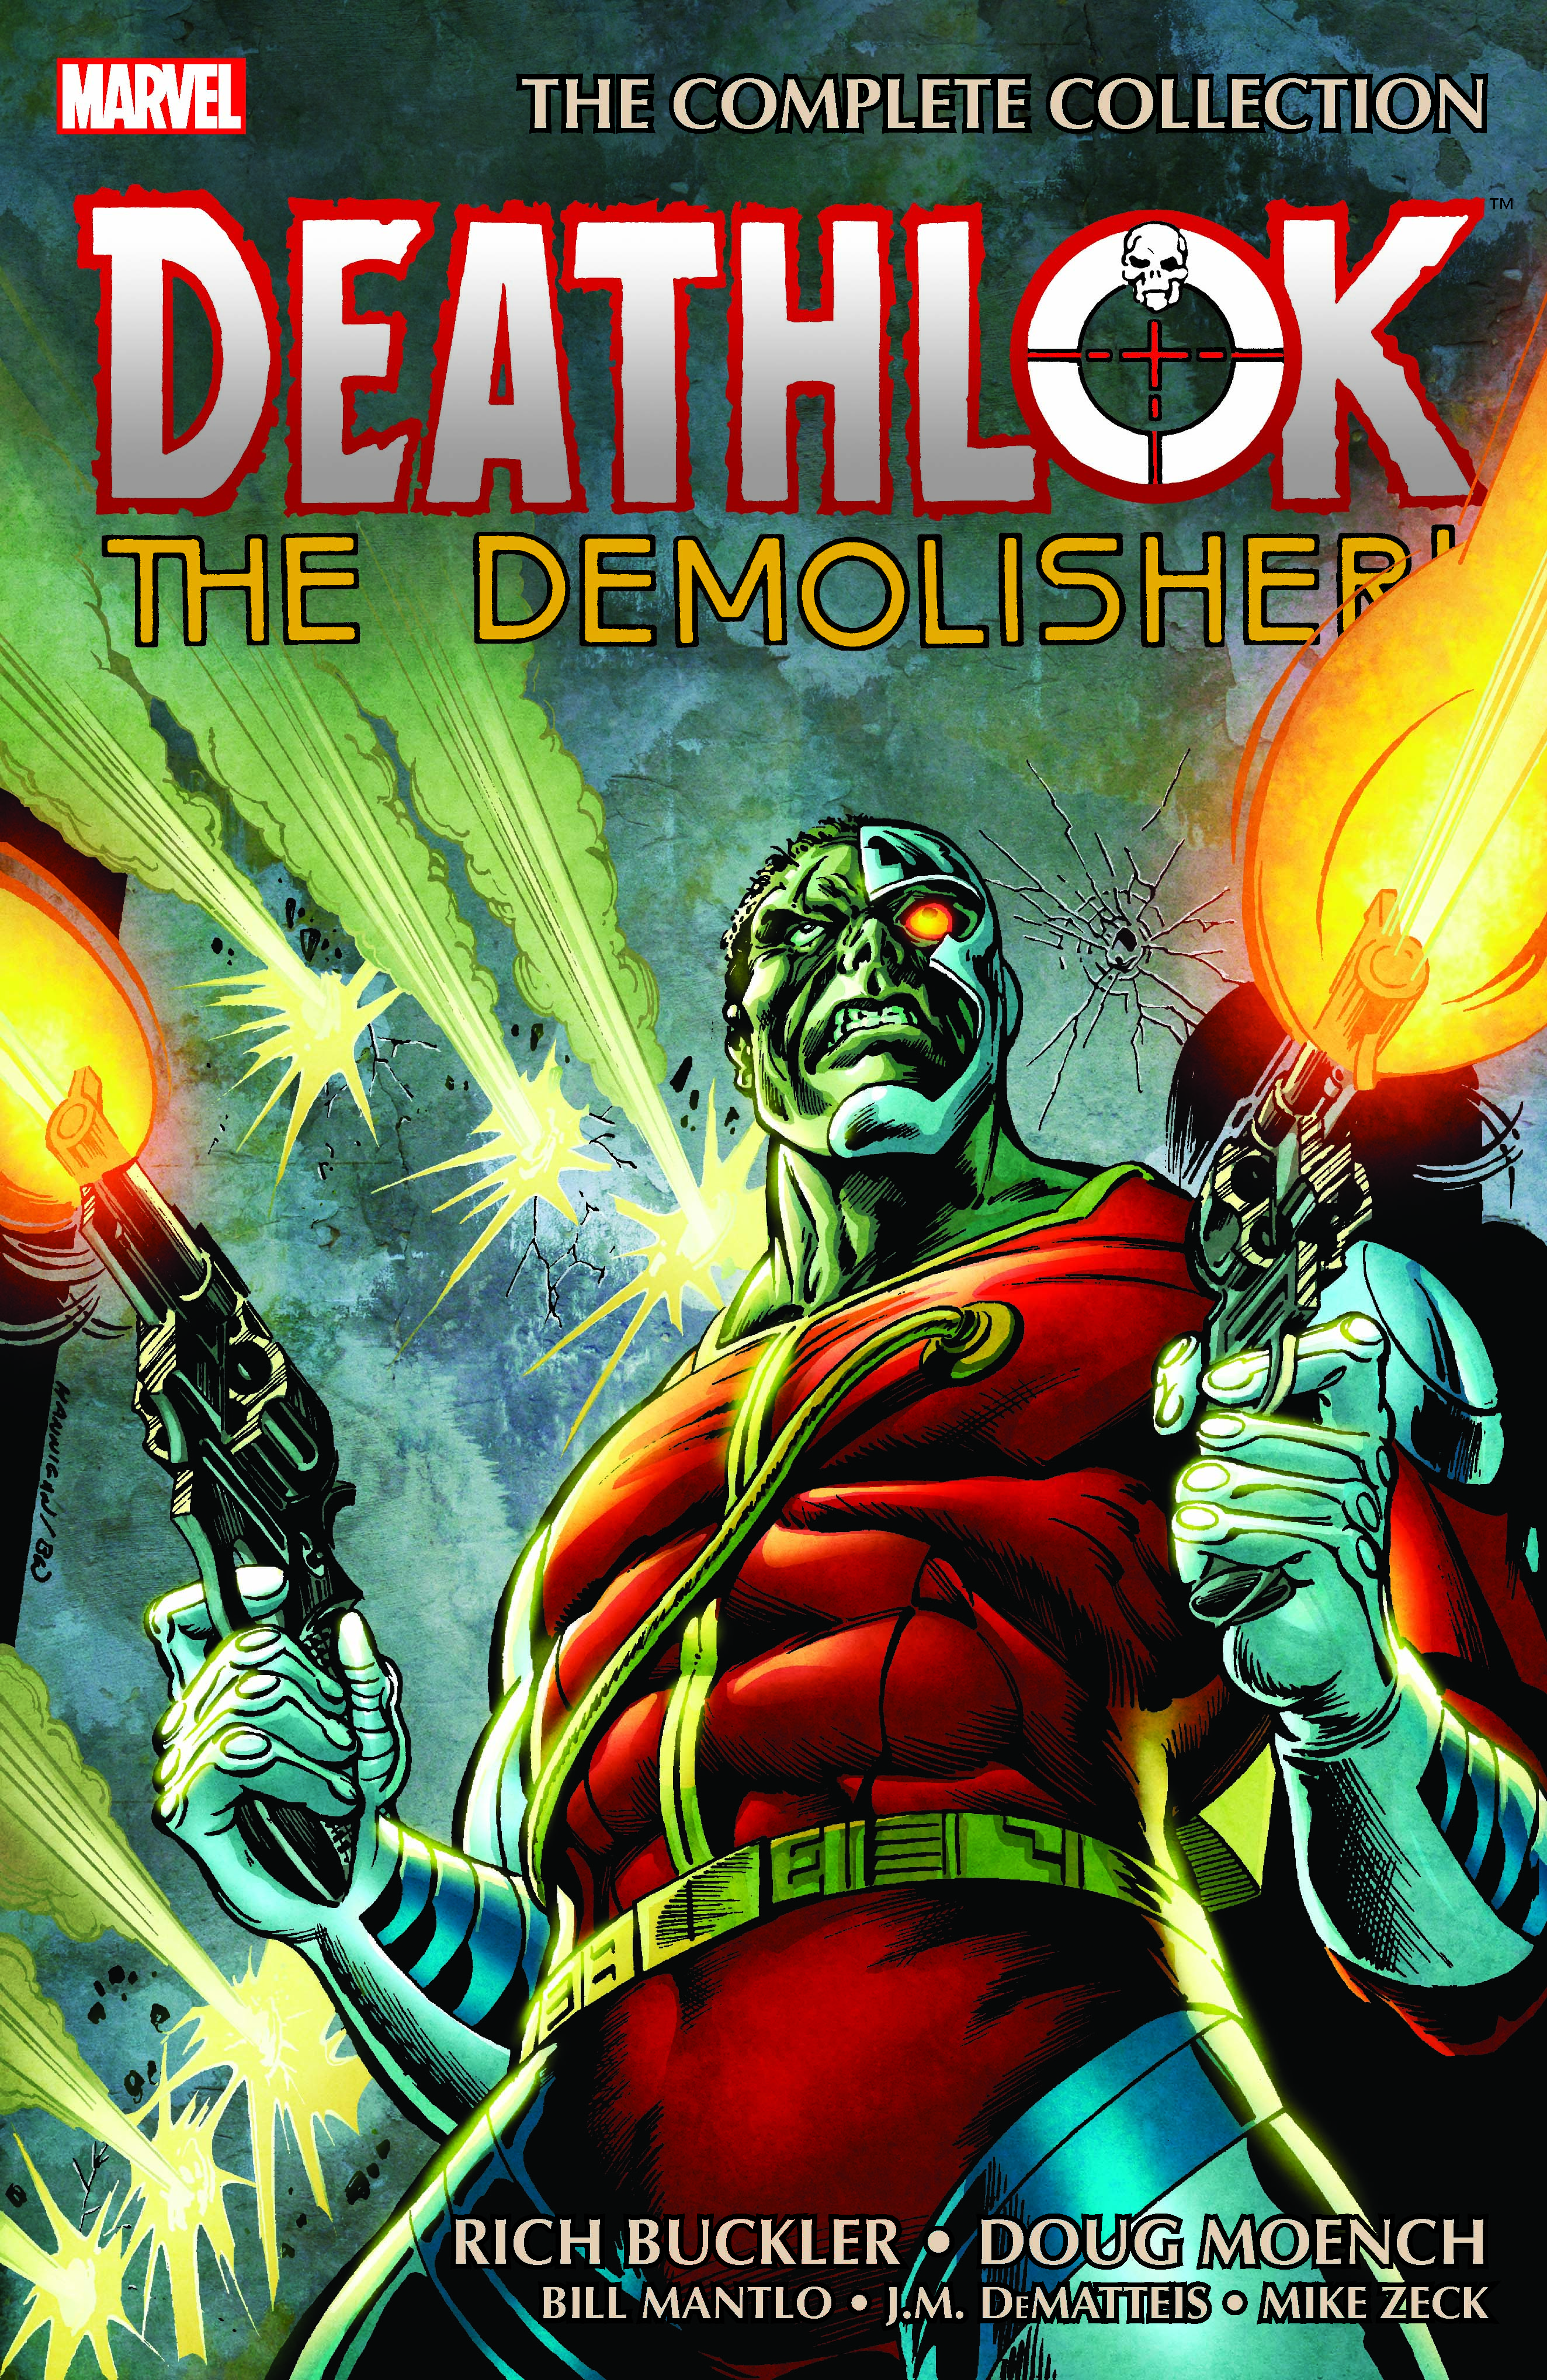 Deathlok The Demolisher: The Complete Collection (Trade Paperback)